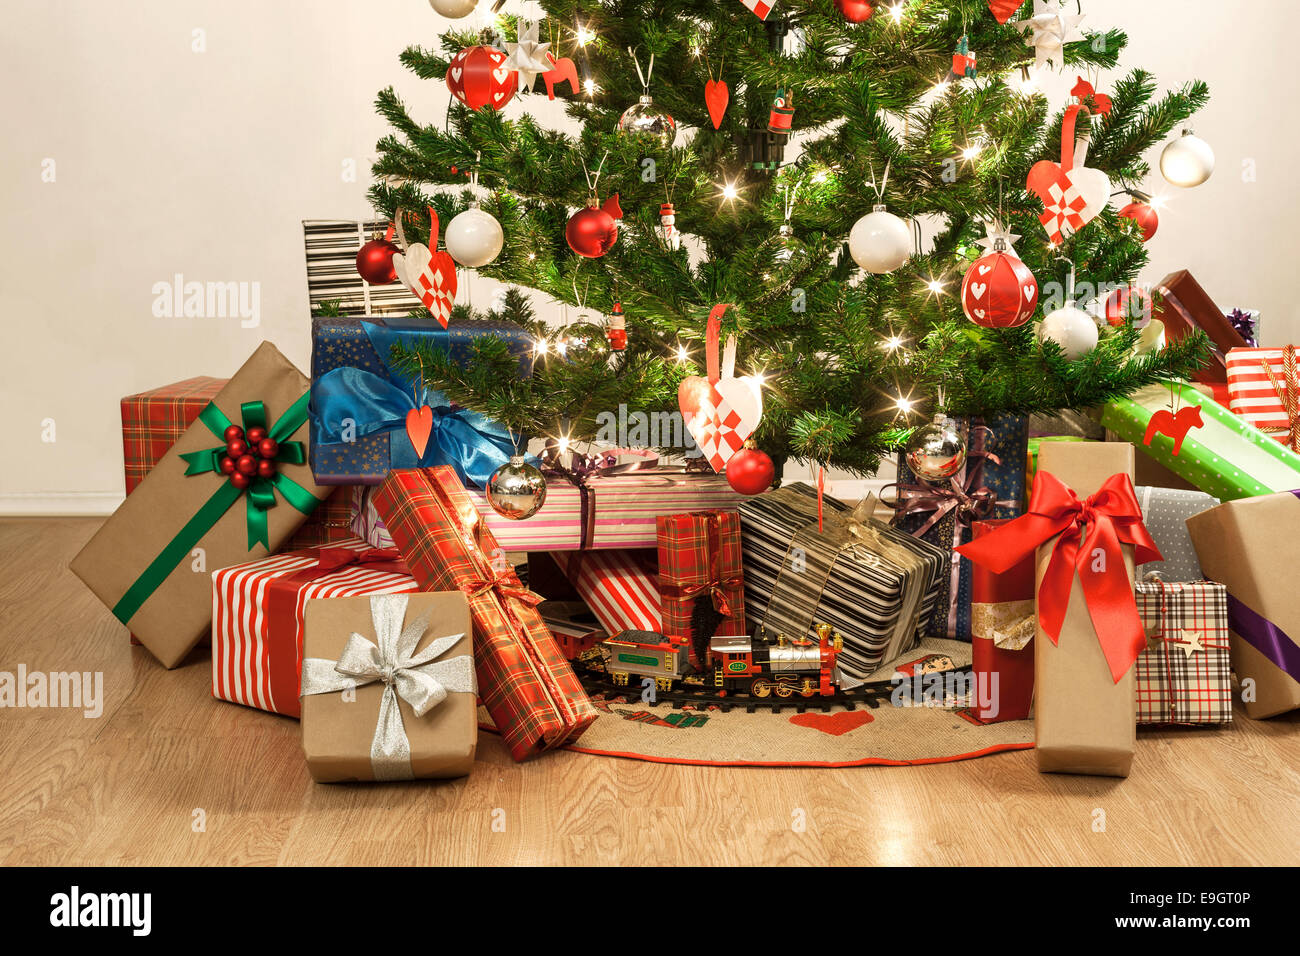 beautifully decorated christmas tree with a toy train and lots of presents Stock Photo